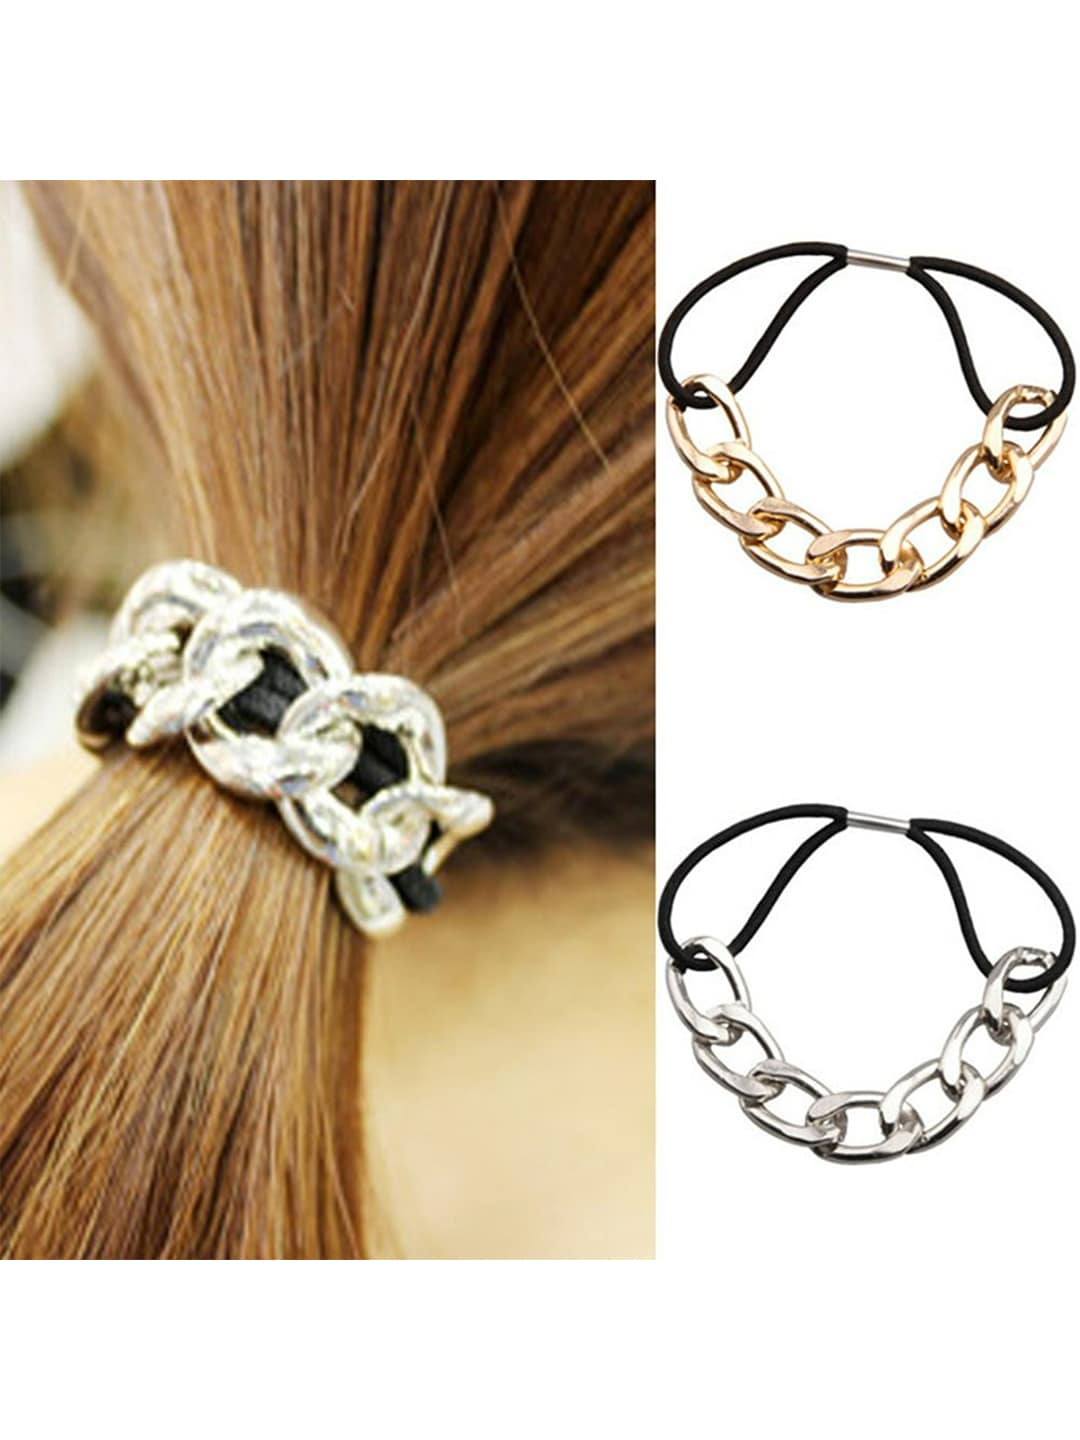 EL REGALO Women Gold-Toned & Silver-Toned Set of 2 Embellished Ponytail Holders - for Women and Girls
Style ID: 17027344